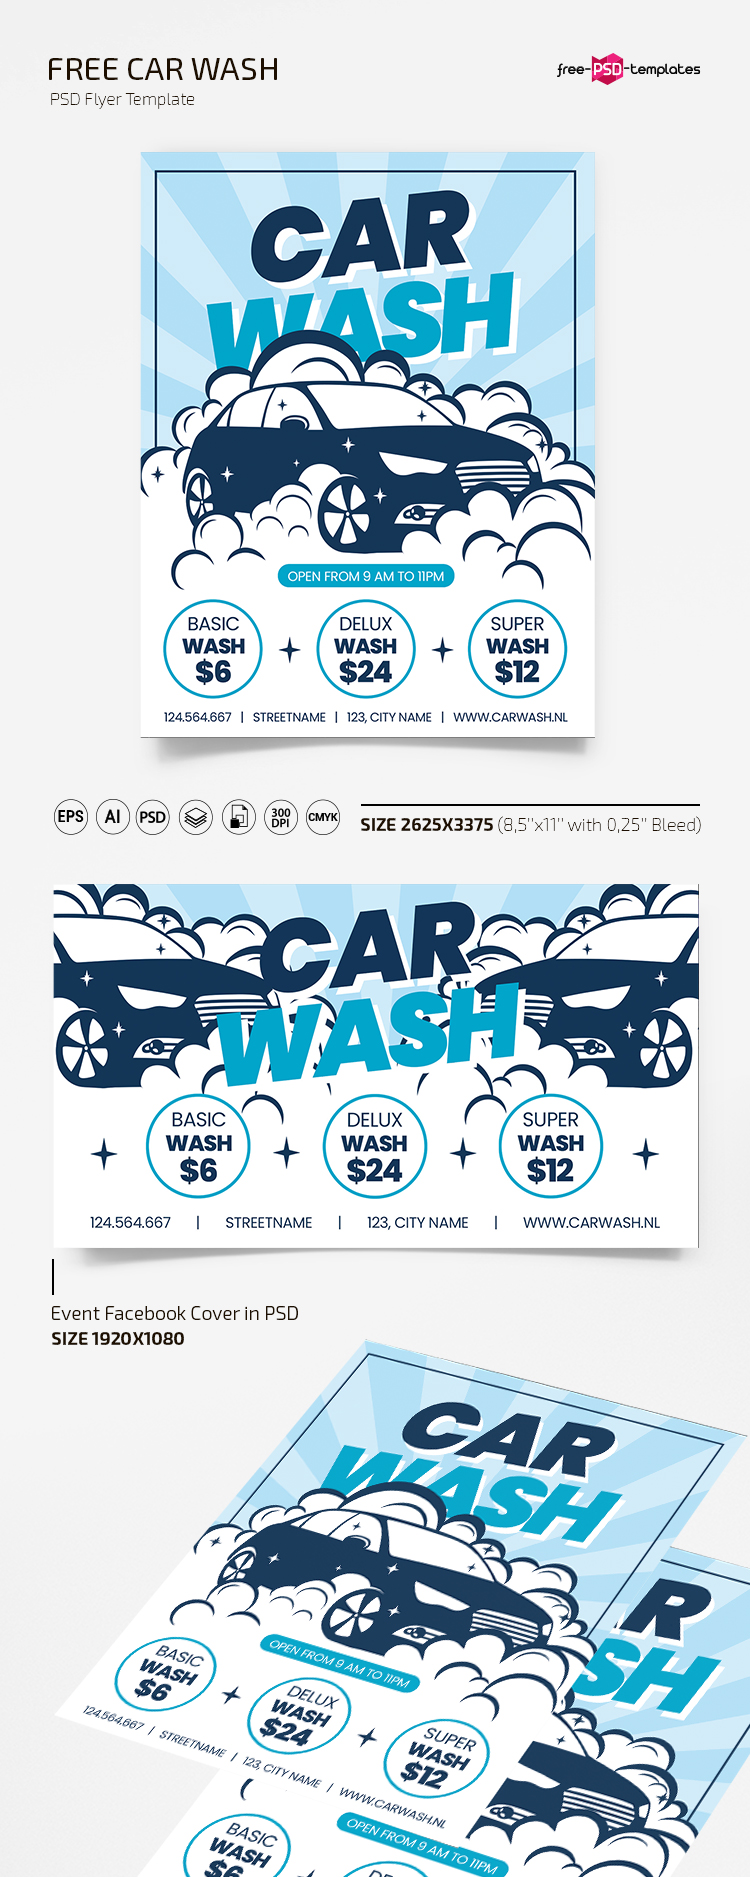 Free Car Wash Flyer Template in PSD + AI Free PSD Templates